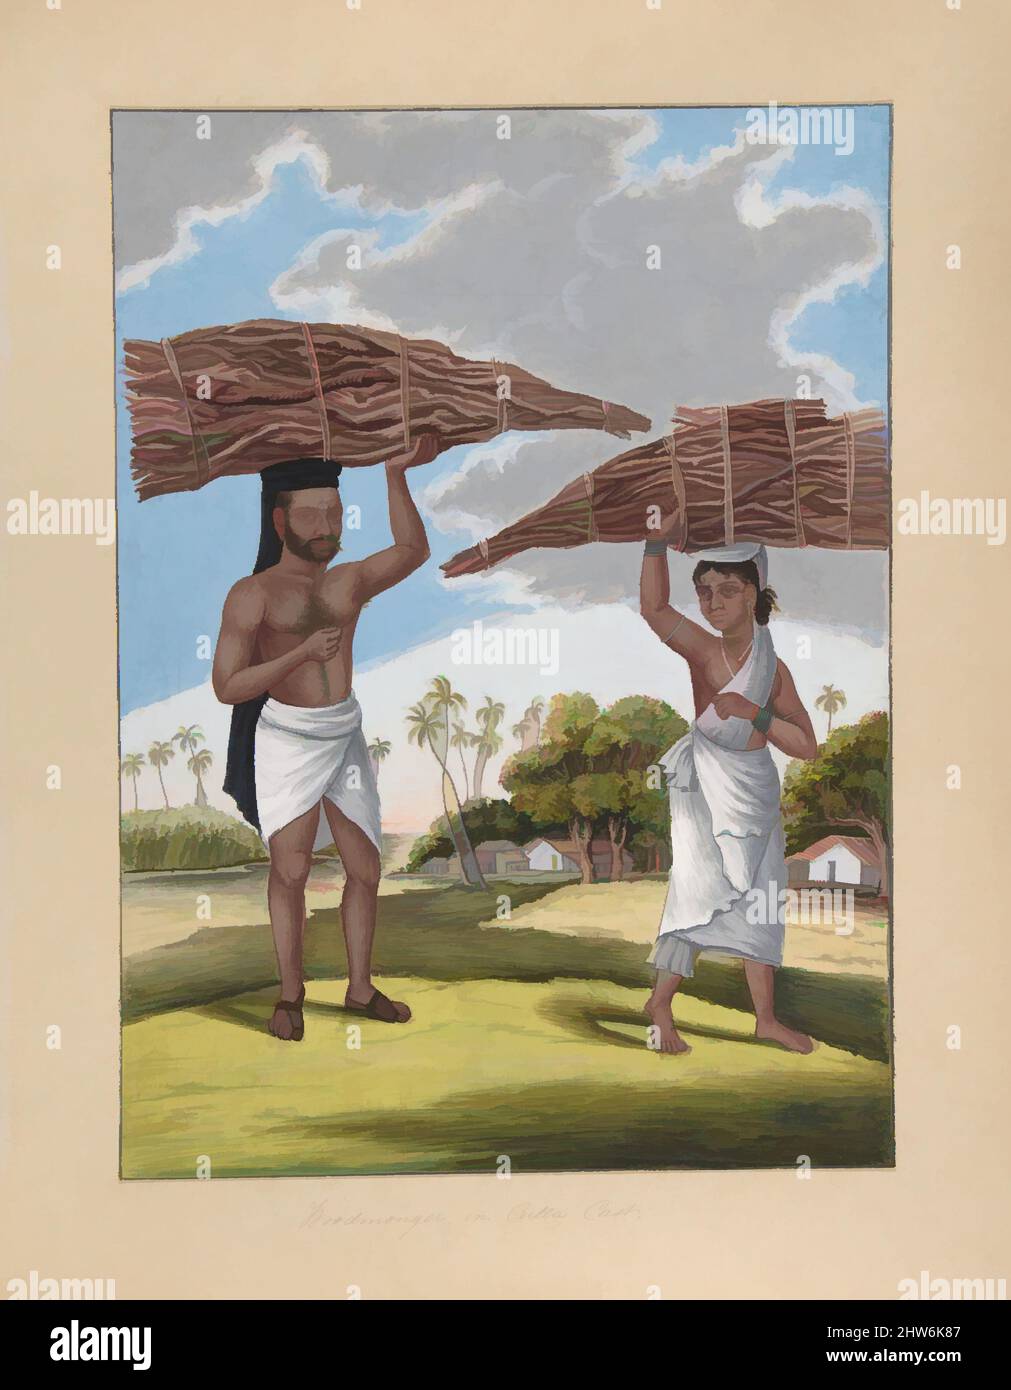 Art inspired by Woodmonger in Culla Caste, from Indian Trades and Castes, ca. 1840, Watercolor and gouache, sheet: 14 3/8 x 10 3/8 in. (36.5 x 26.4 cm), Drawings, Anonymous, Indian, 19th century, Classic works modernized by Artotop with a splash of modernity. Shapes, color and value, eye-catching visual impact on art. Emotions through freedom of artworks in a contemporary way. A timeless message pursuing a wildly creative new direction. Artists turning to the digital medium and creating the Artotop NFT Stock Photo